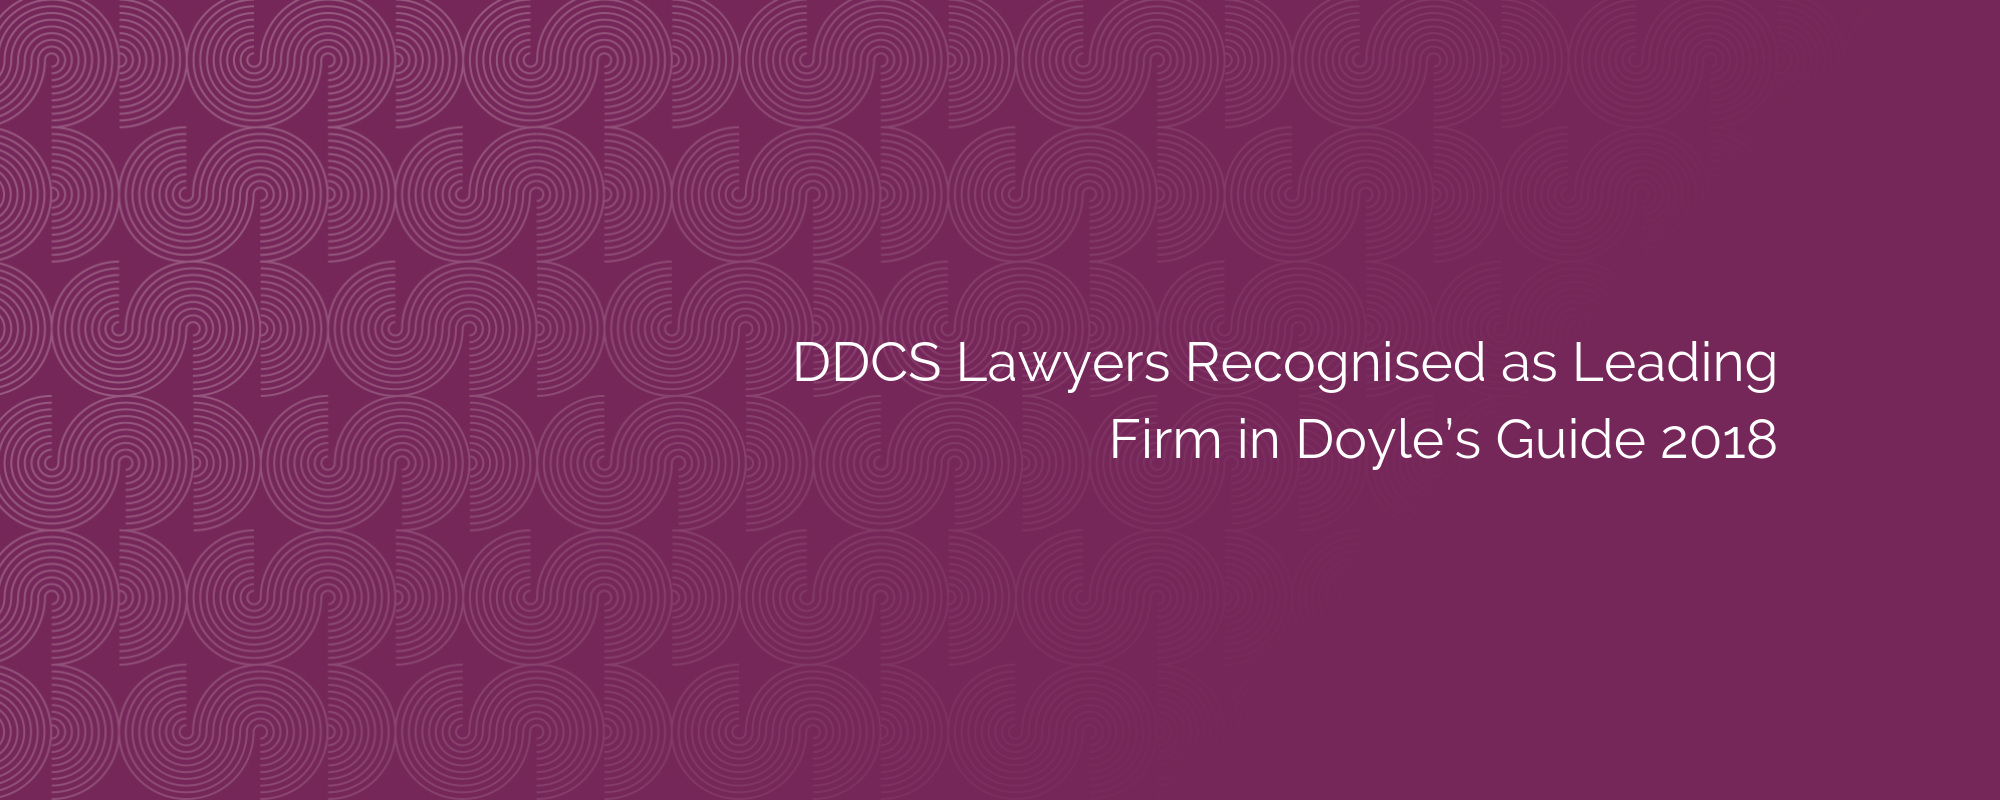 DDCs Lawyers recognised in Doyle's Guide 2018